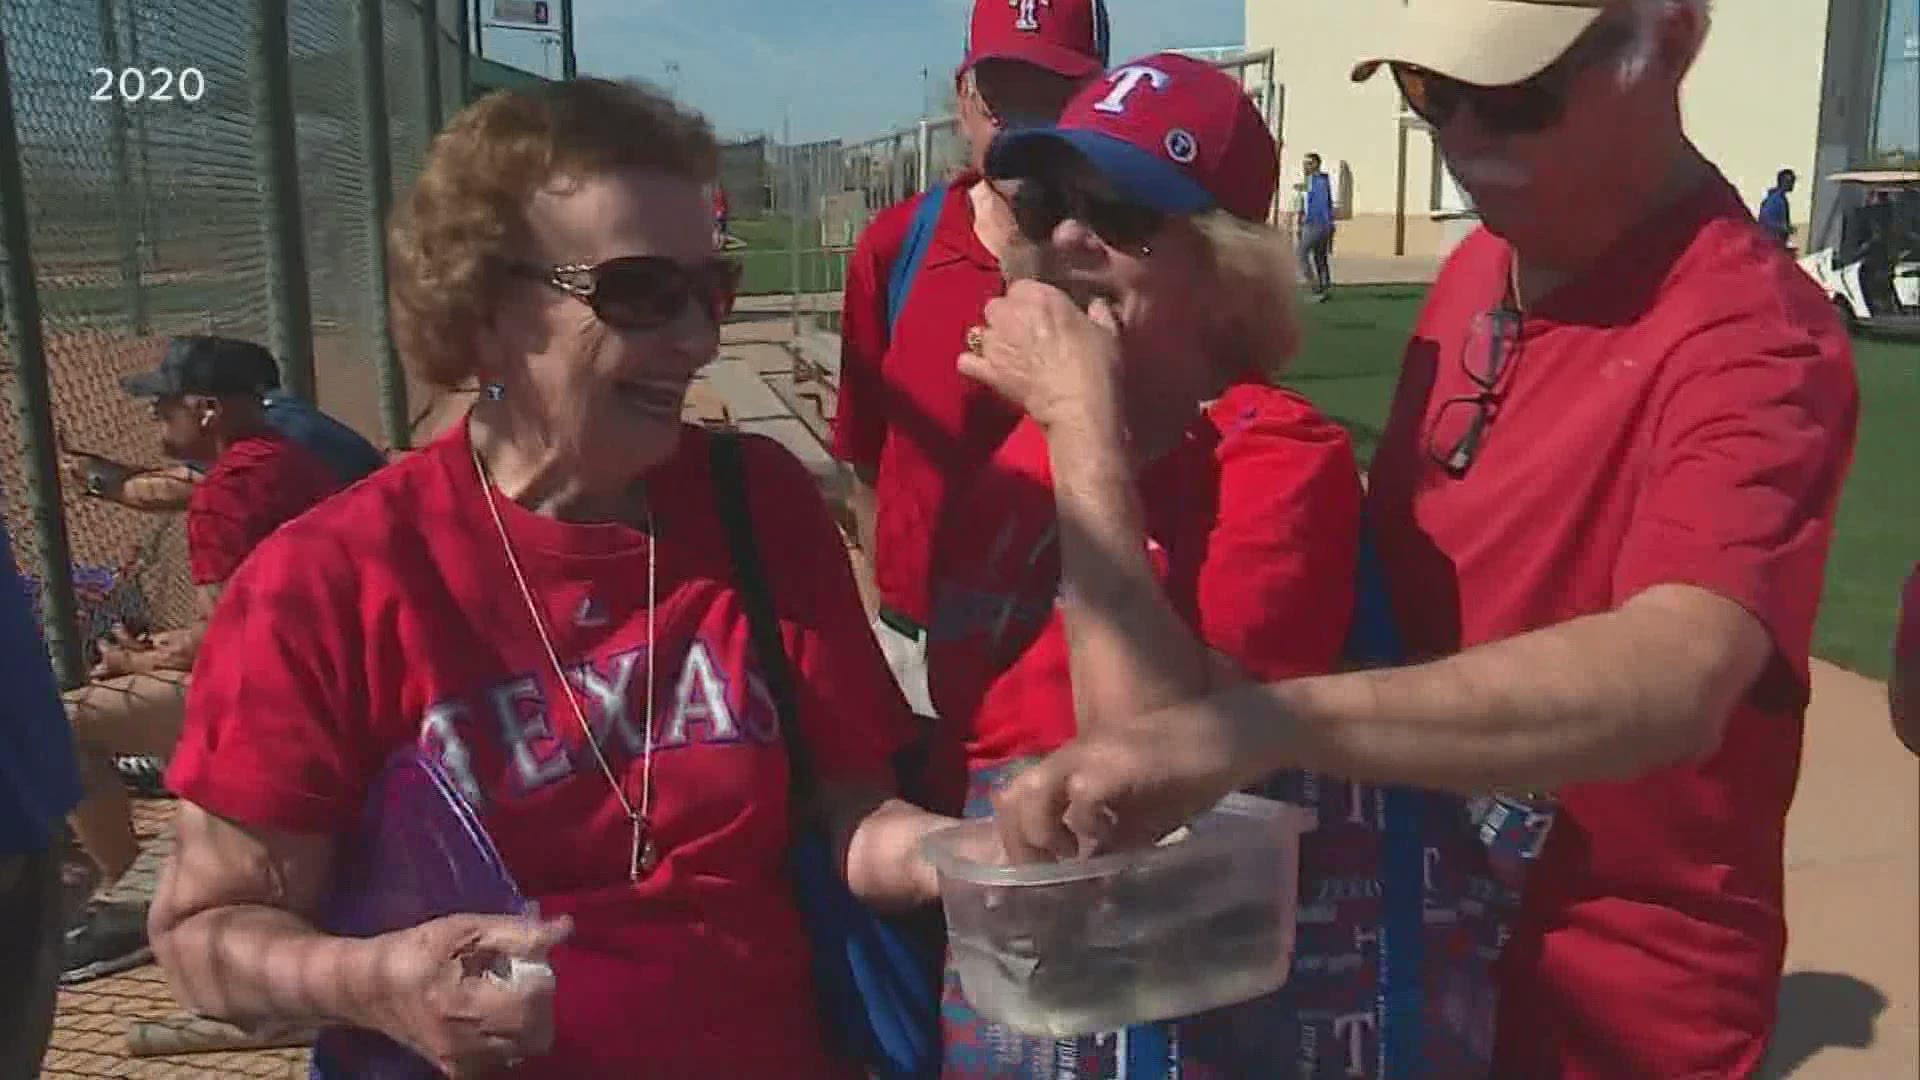 Shirley Kost brought cookies to the Rangers for more than 30 years. She died at 82 Thursday.